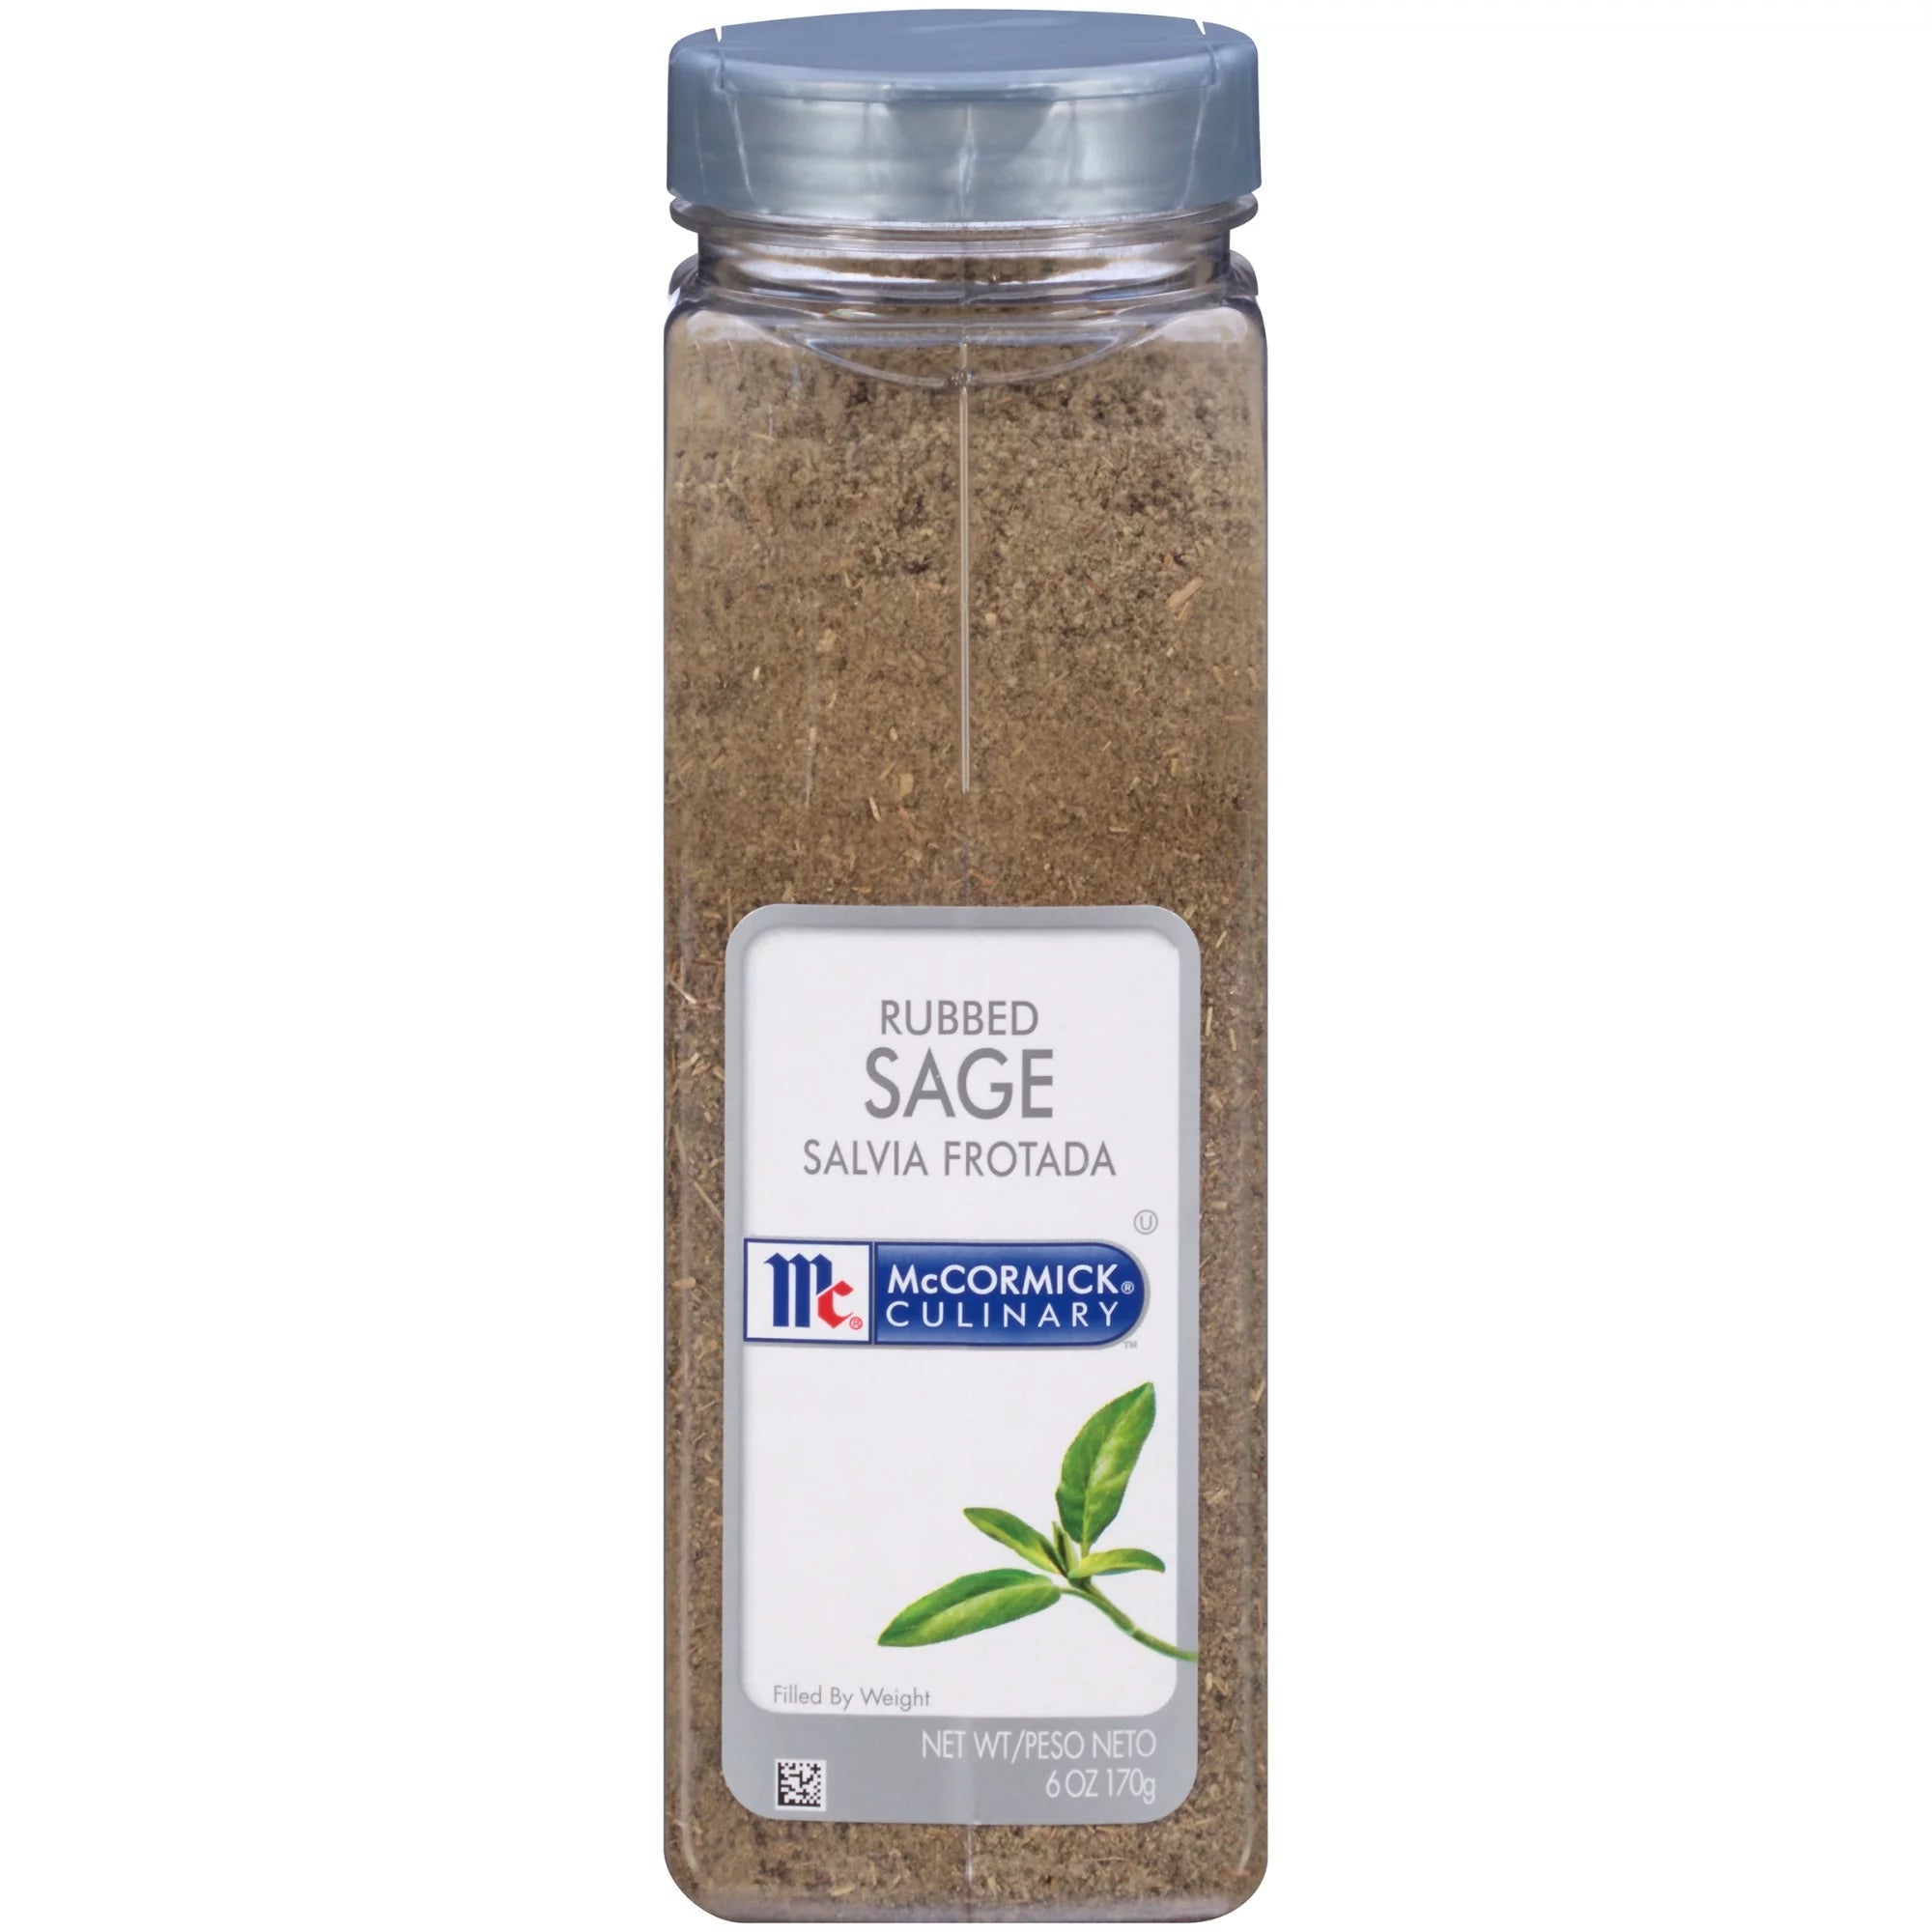 6oz Rubbed Sage – Arnall Grocery